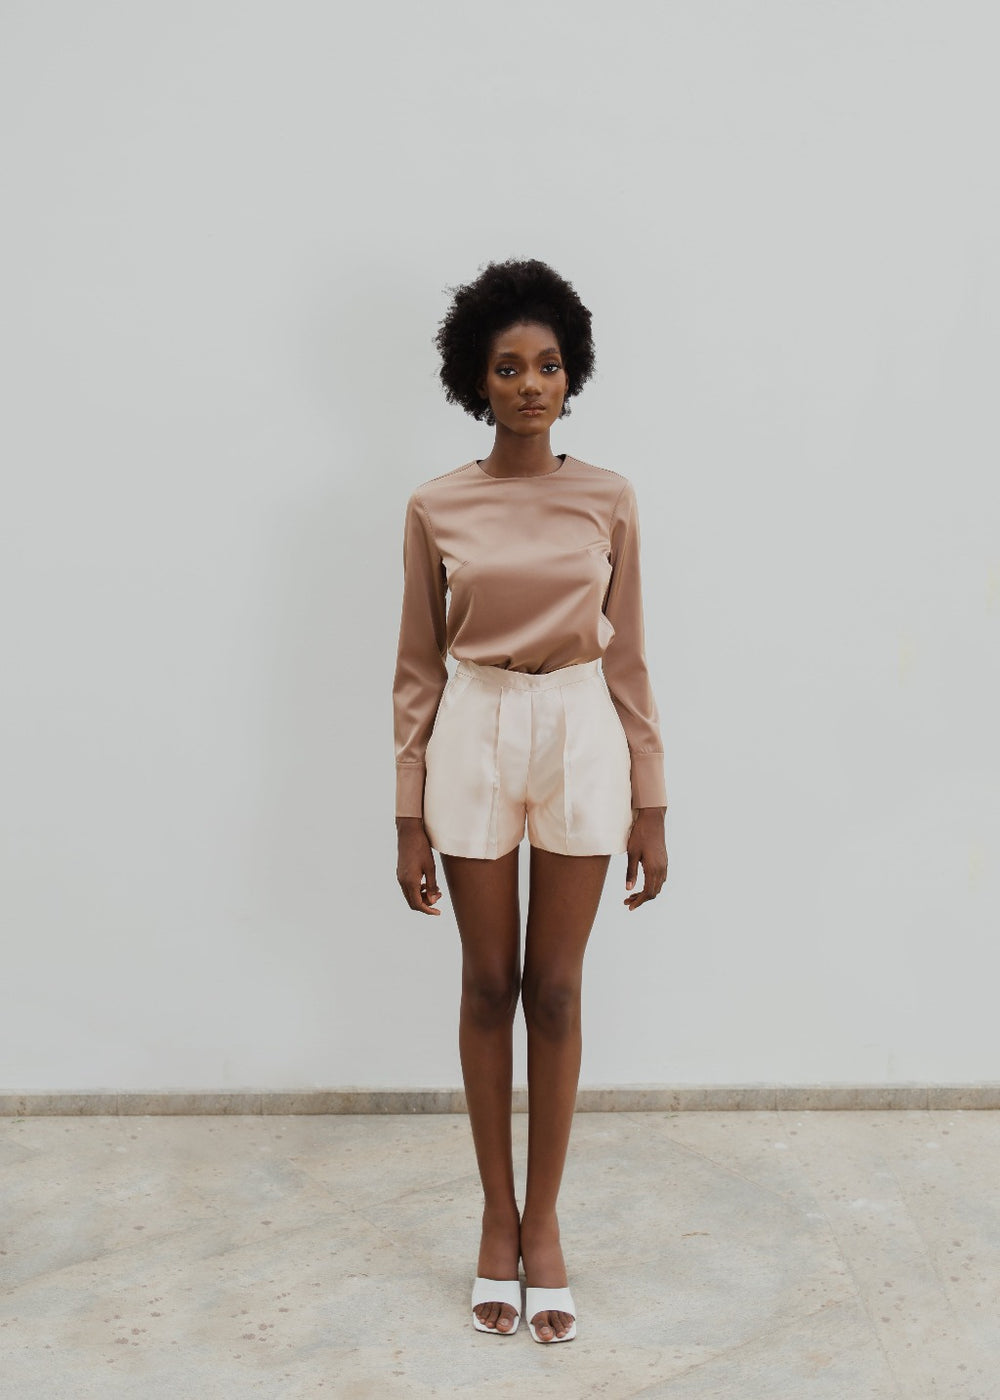 A model wearing a brown top and Nude colored shorts